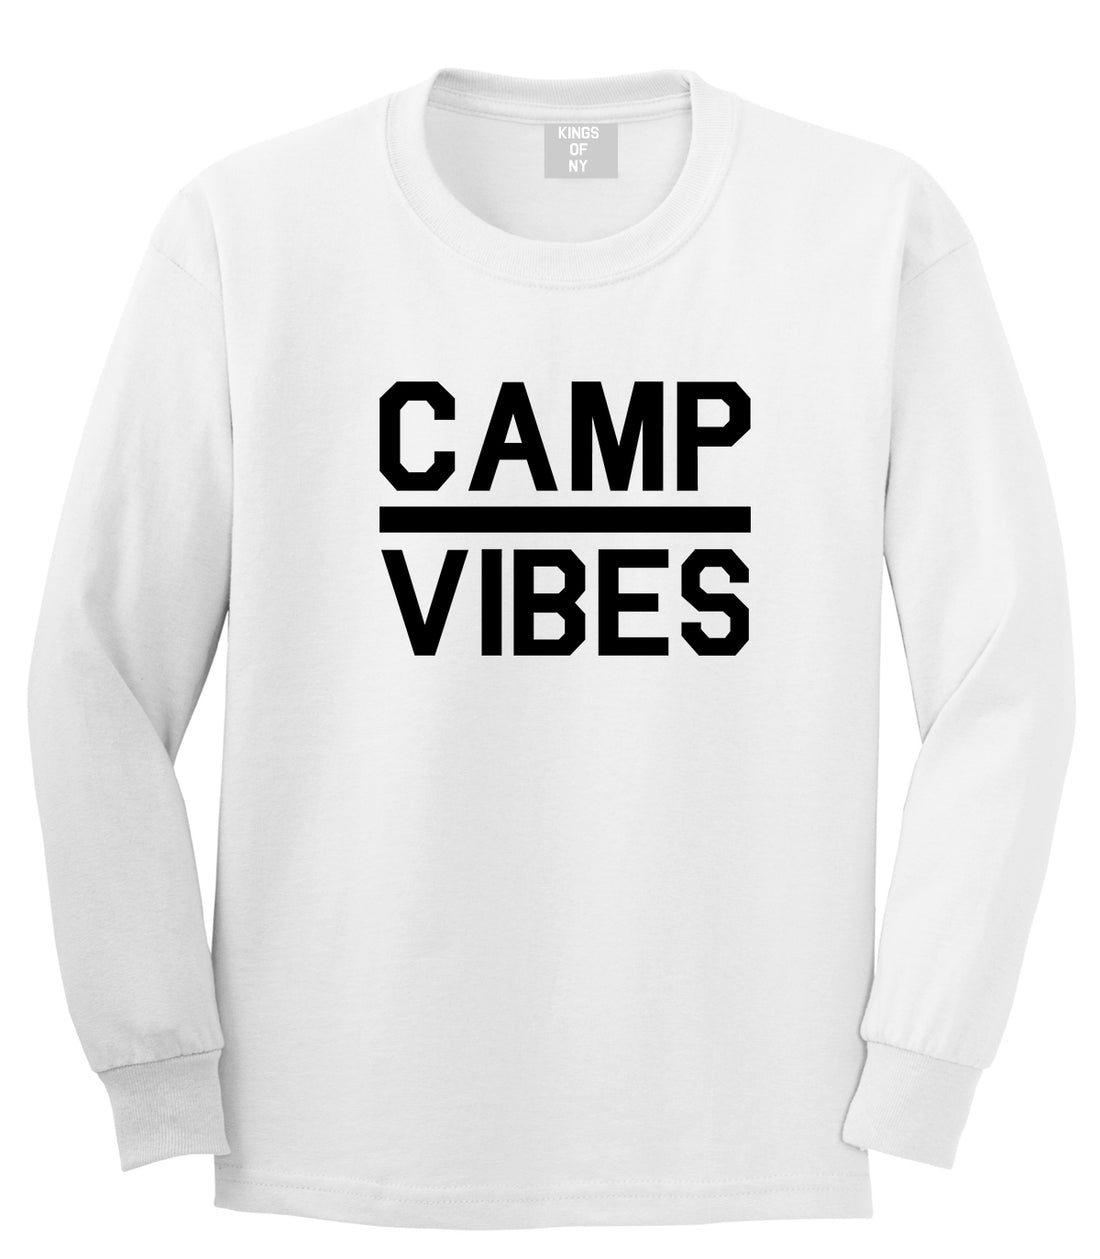 Camp Vibes White Long Sleeve T-Shirt by Kings Of NY